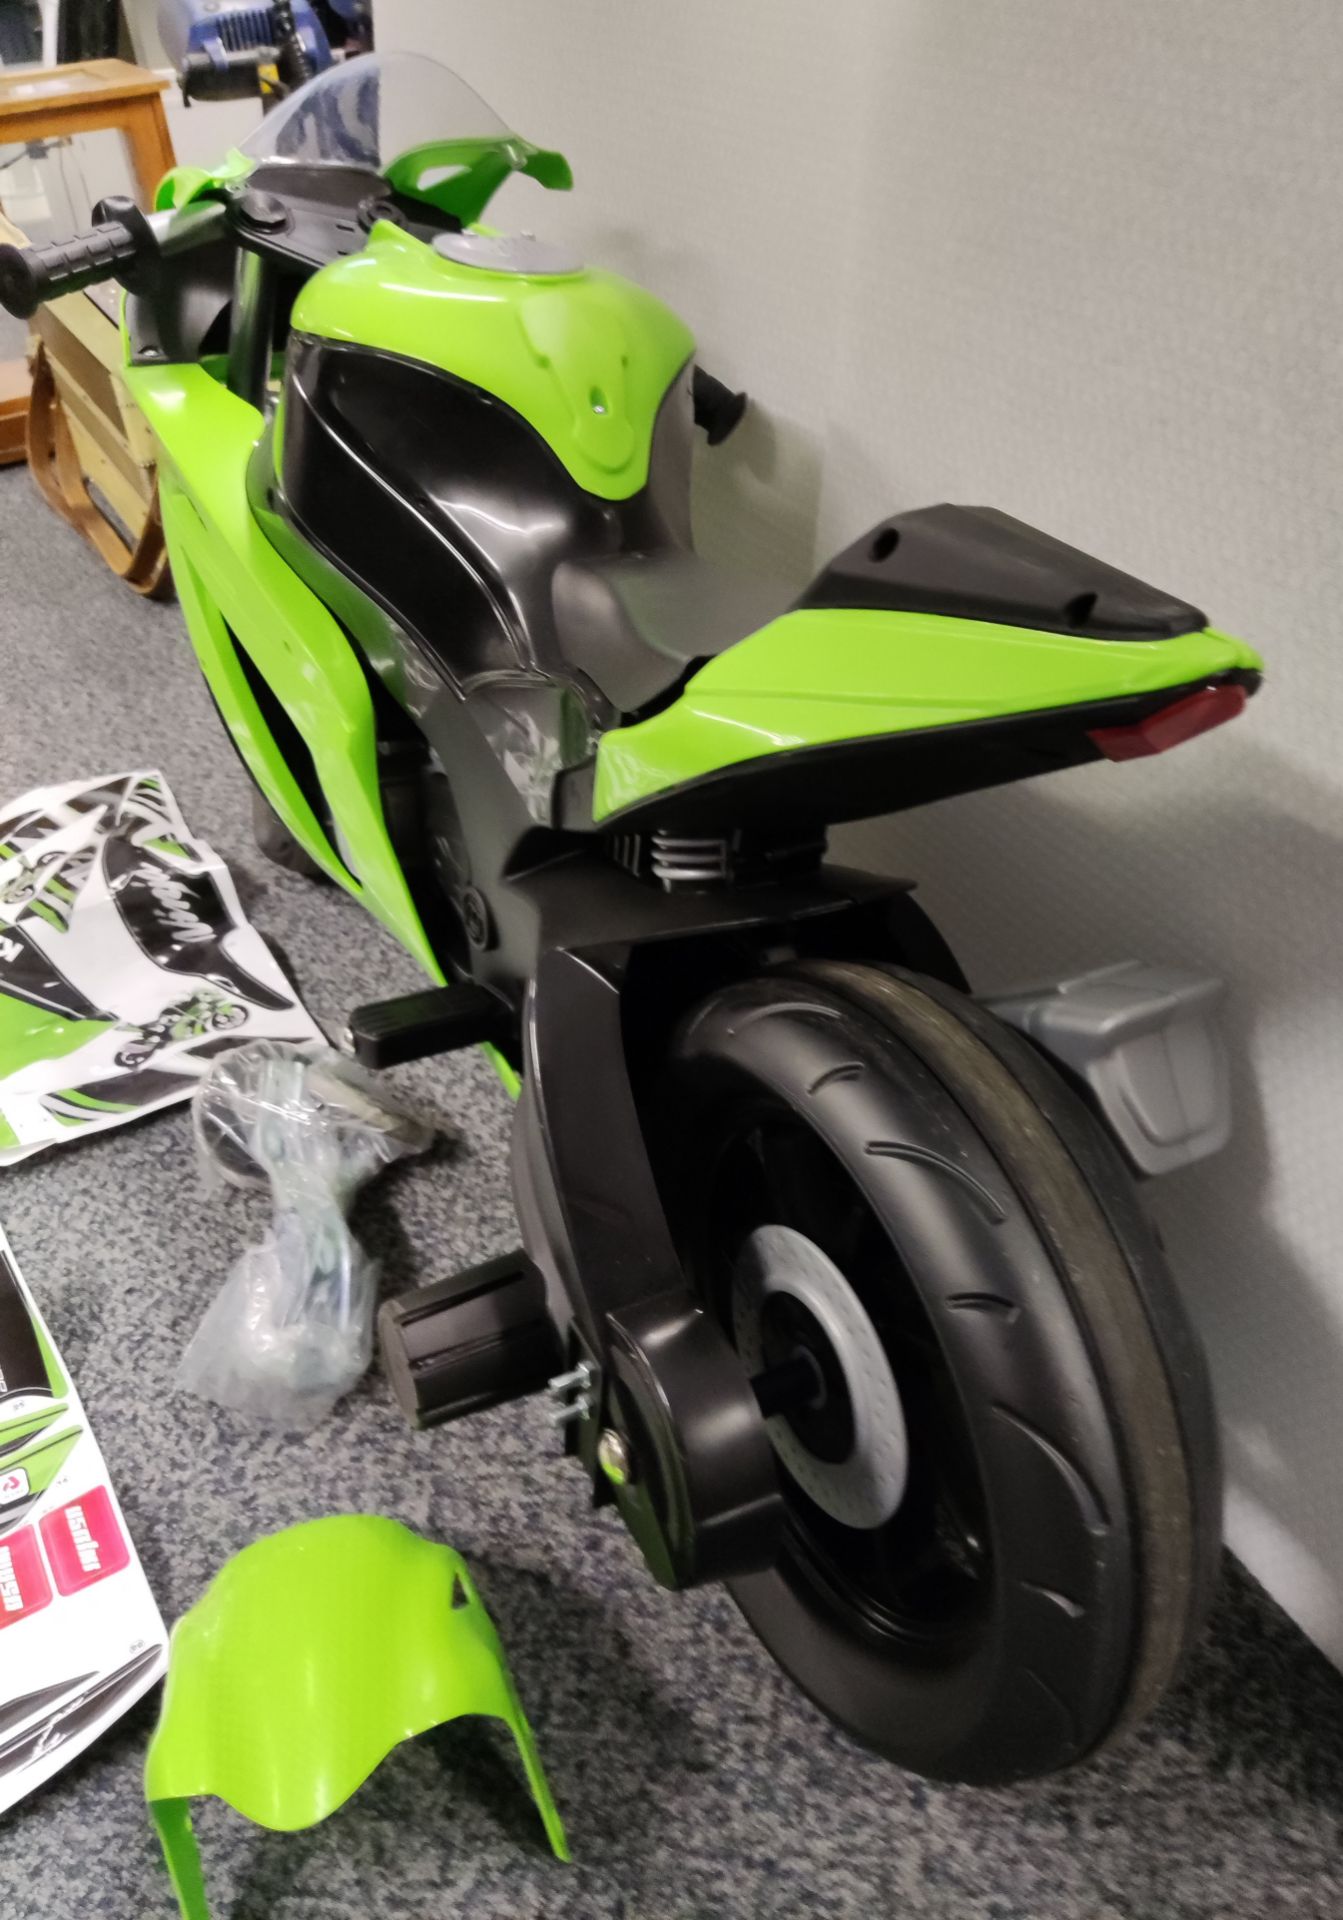 1 x Injusa Kids Electric Ride On Kawasaki ZX10 12V Motorcycle - 6495 - HTYS174 - CL987 - Location: - Image 13 of 24